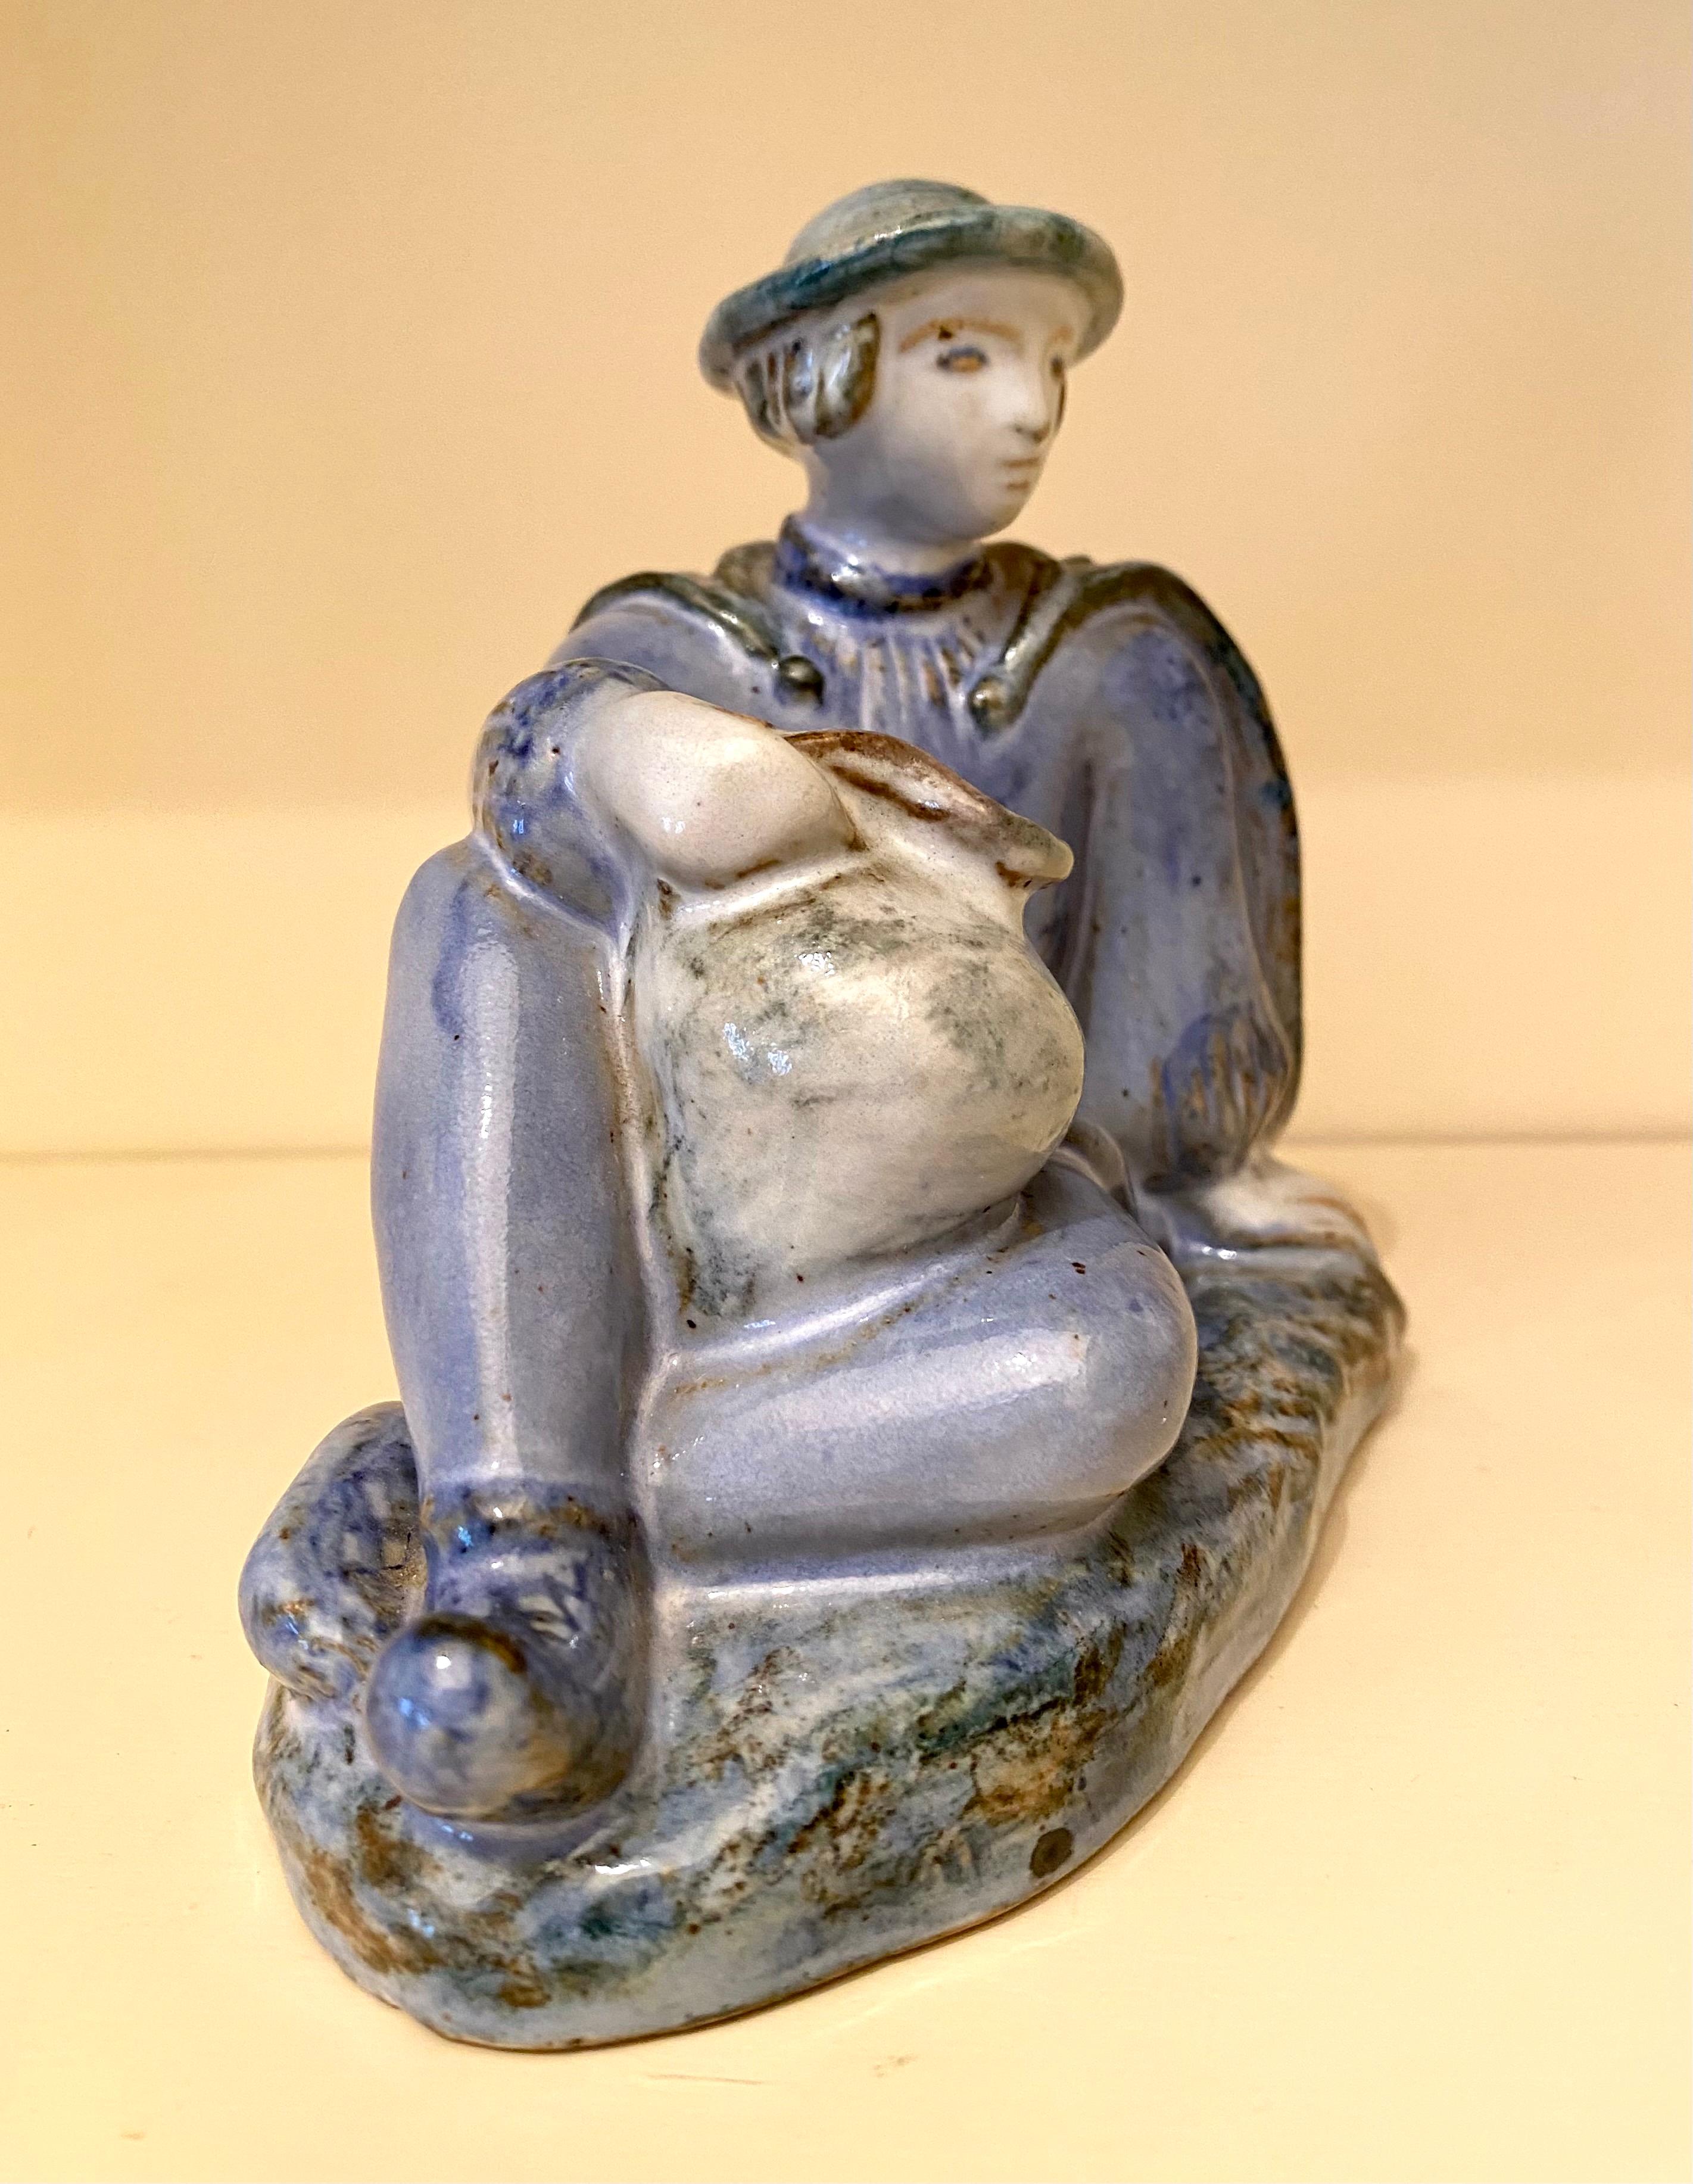 Great Vintage Danish Stoneware Pottery from L. Hjorth of a young boy with a jug in respite. His soft blue palate and artistry makes this a unique 20th century sculpture. A great piece for any ceramic collection with a lot of presence for its size.